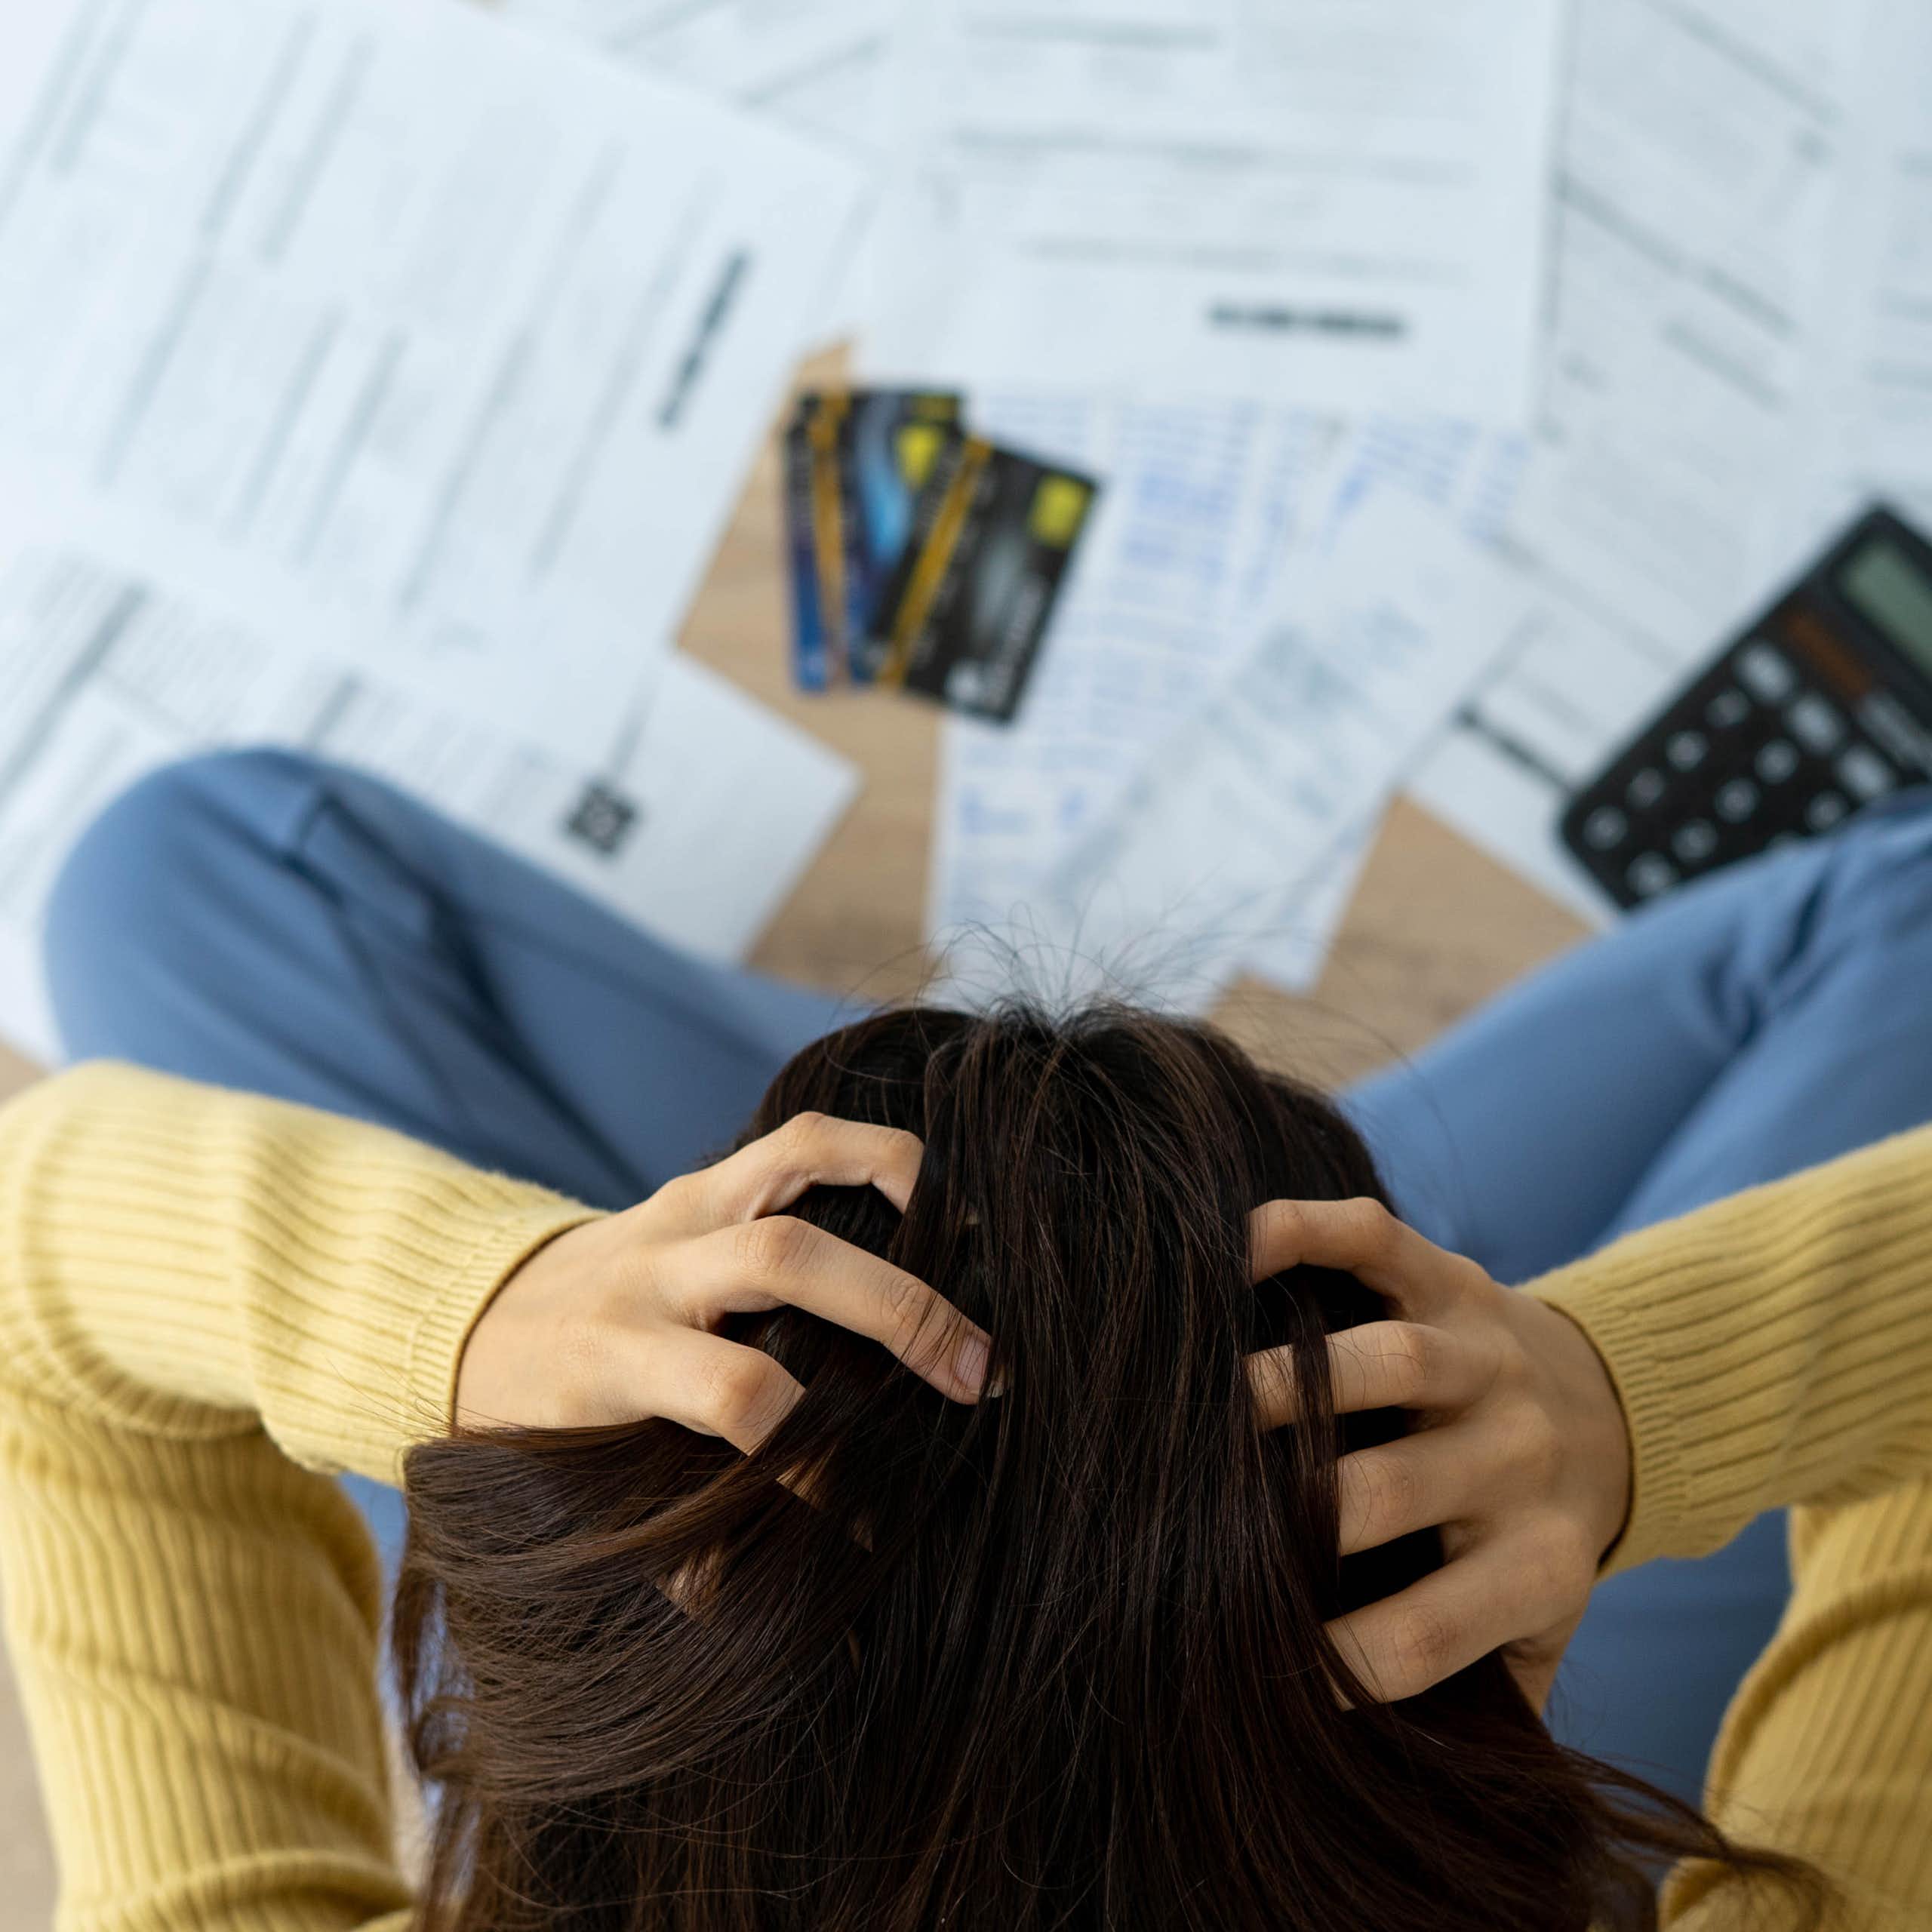 Top-down view of a woman sitting in front of a pile of paperwork with her head in her hands